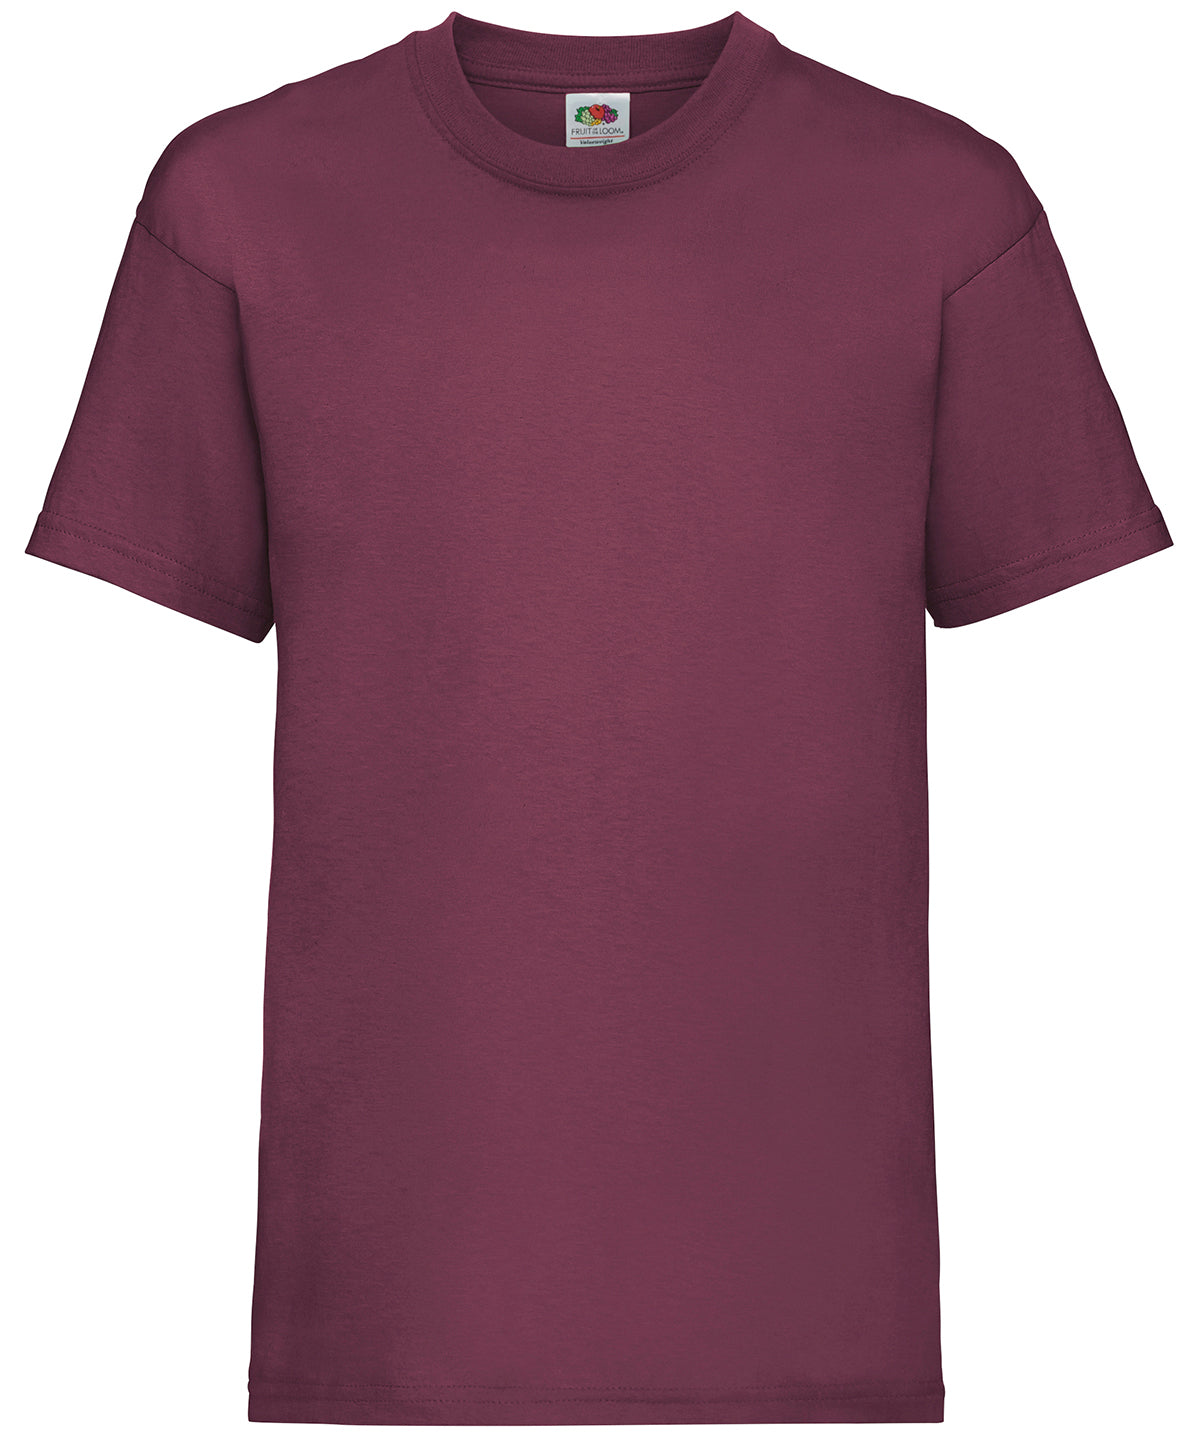 Fruit of the Loom Kids valueweight T Burgundy